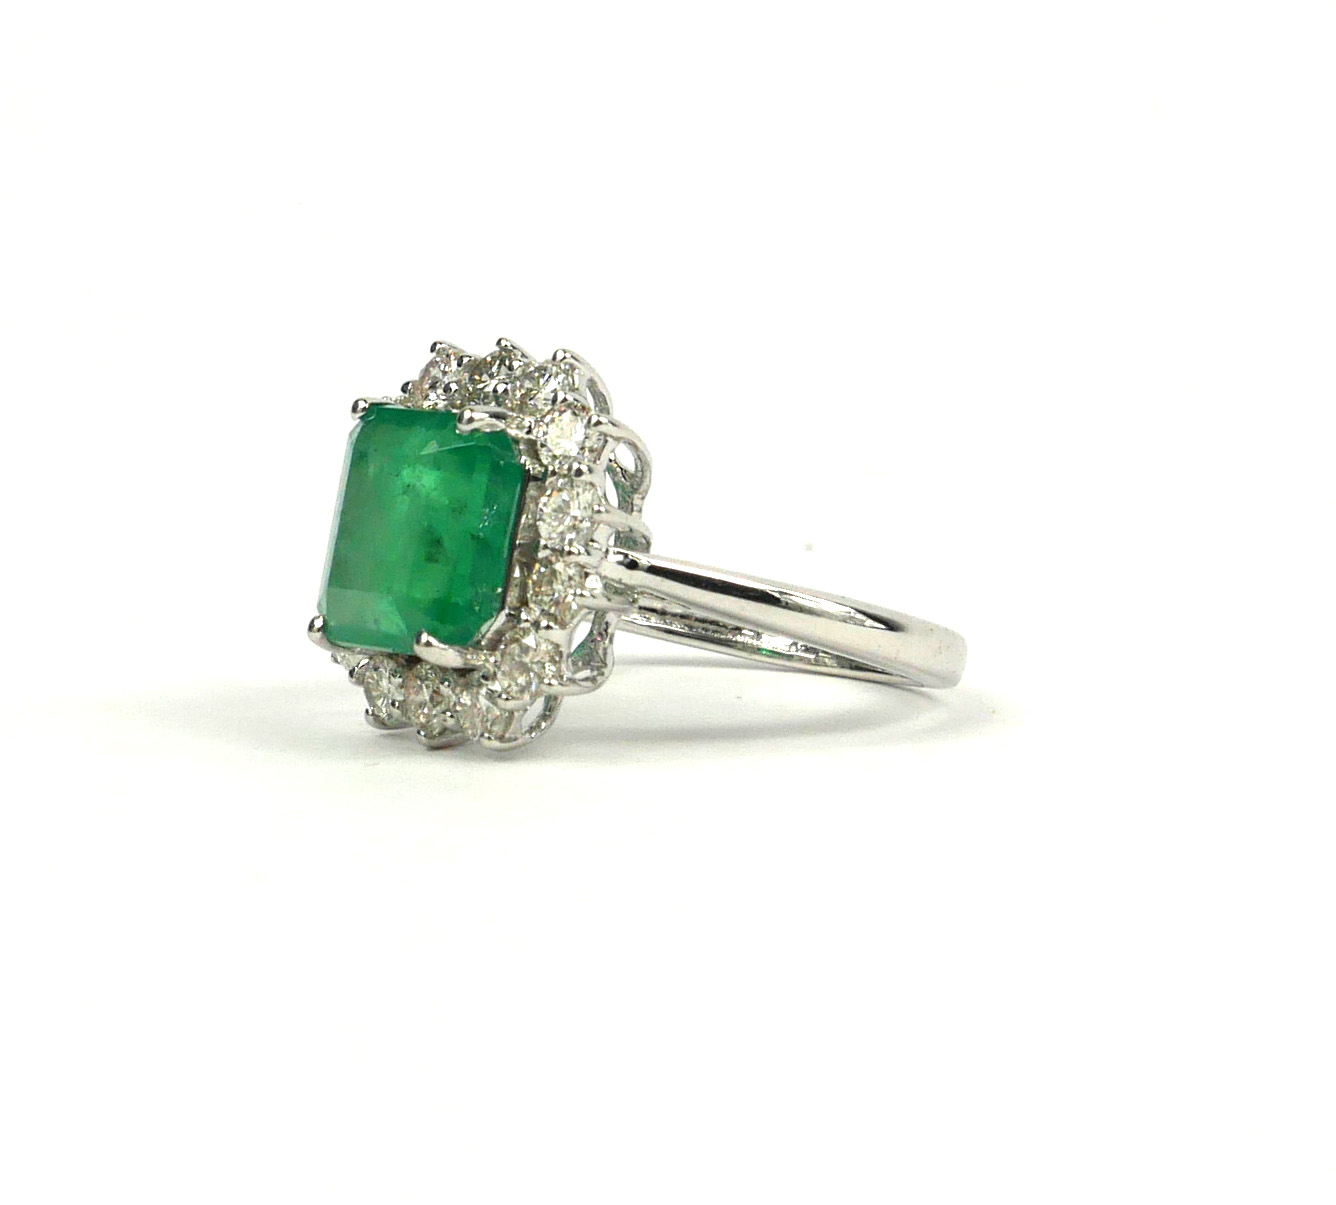 A 18CT WHITE GOLD EMERALD AND DIAMOND CLUSTER RING. (Approx Emerald 3.68ct, Diamonds 1.05ct) - Image 2 of 3